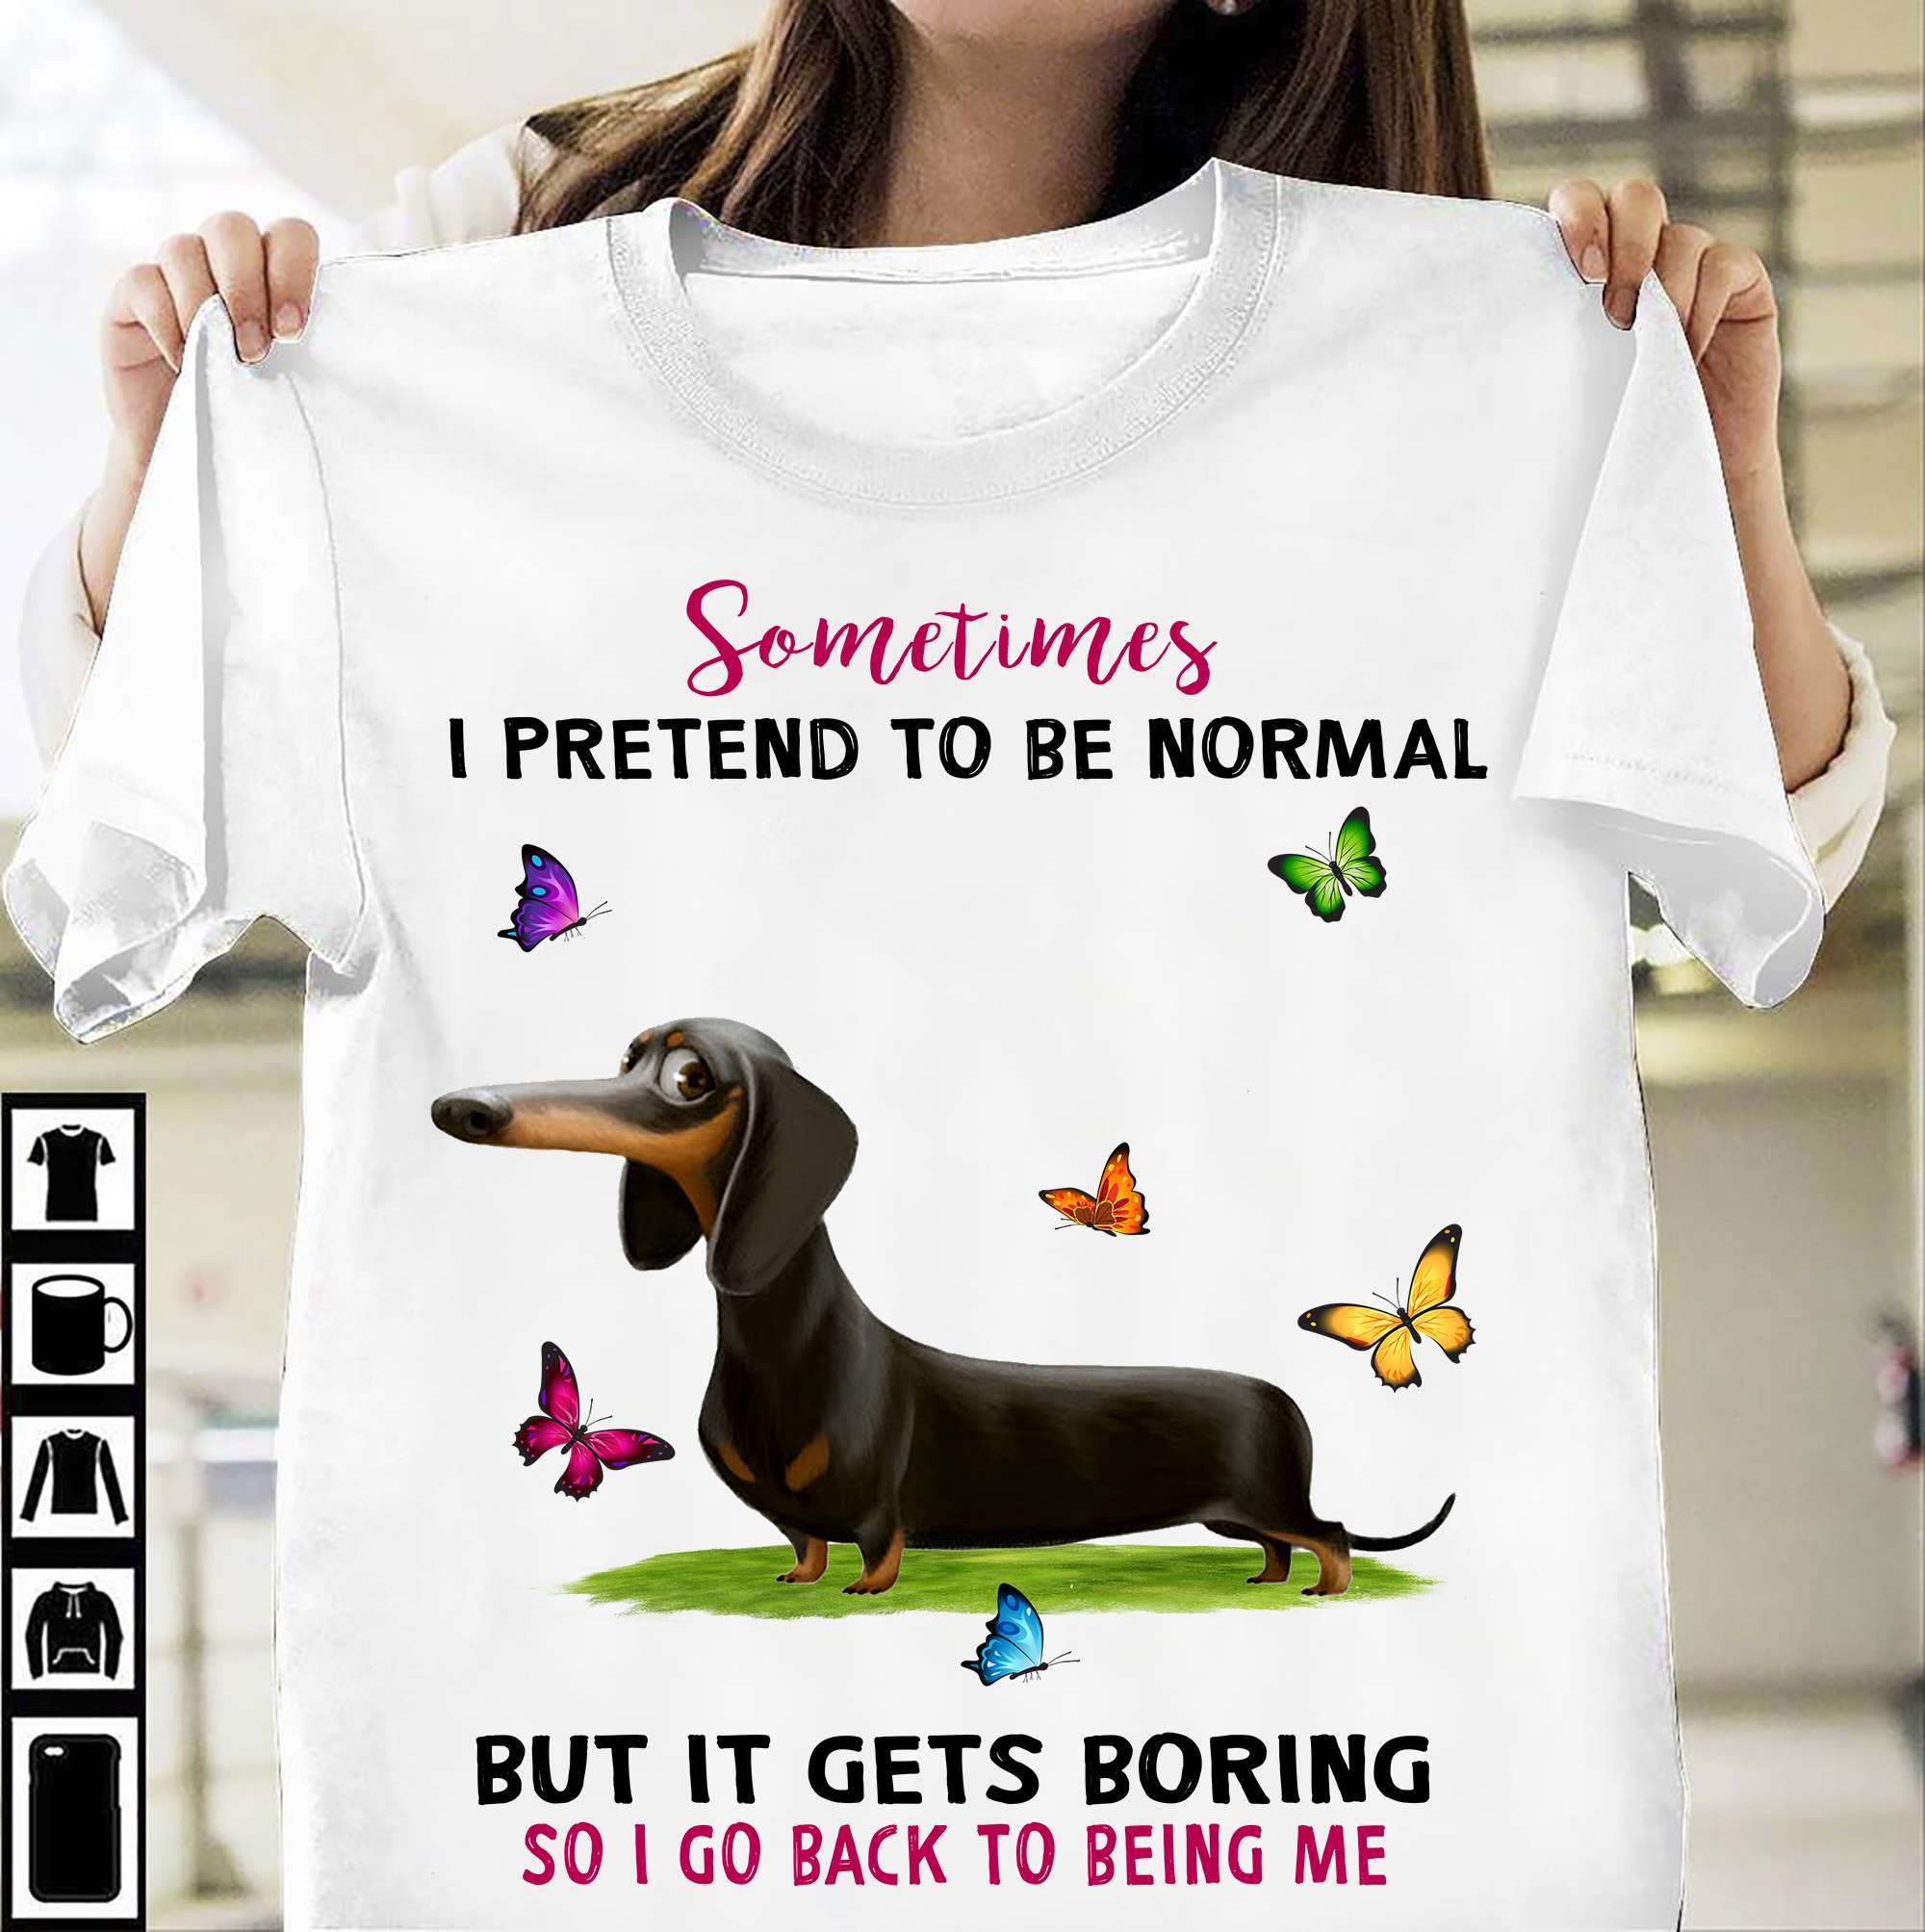 Sometimes I pretend to be normal but it gets boring so I go back to being me - Dachshund dog